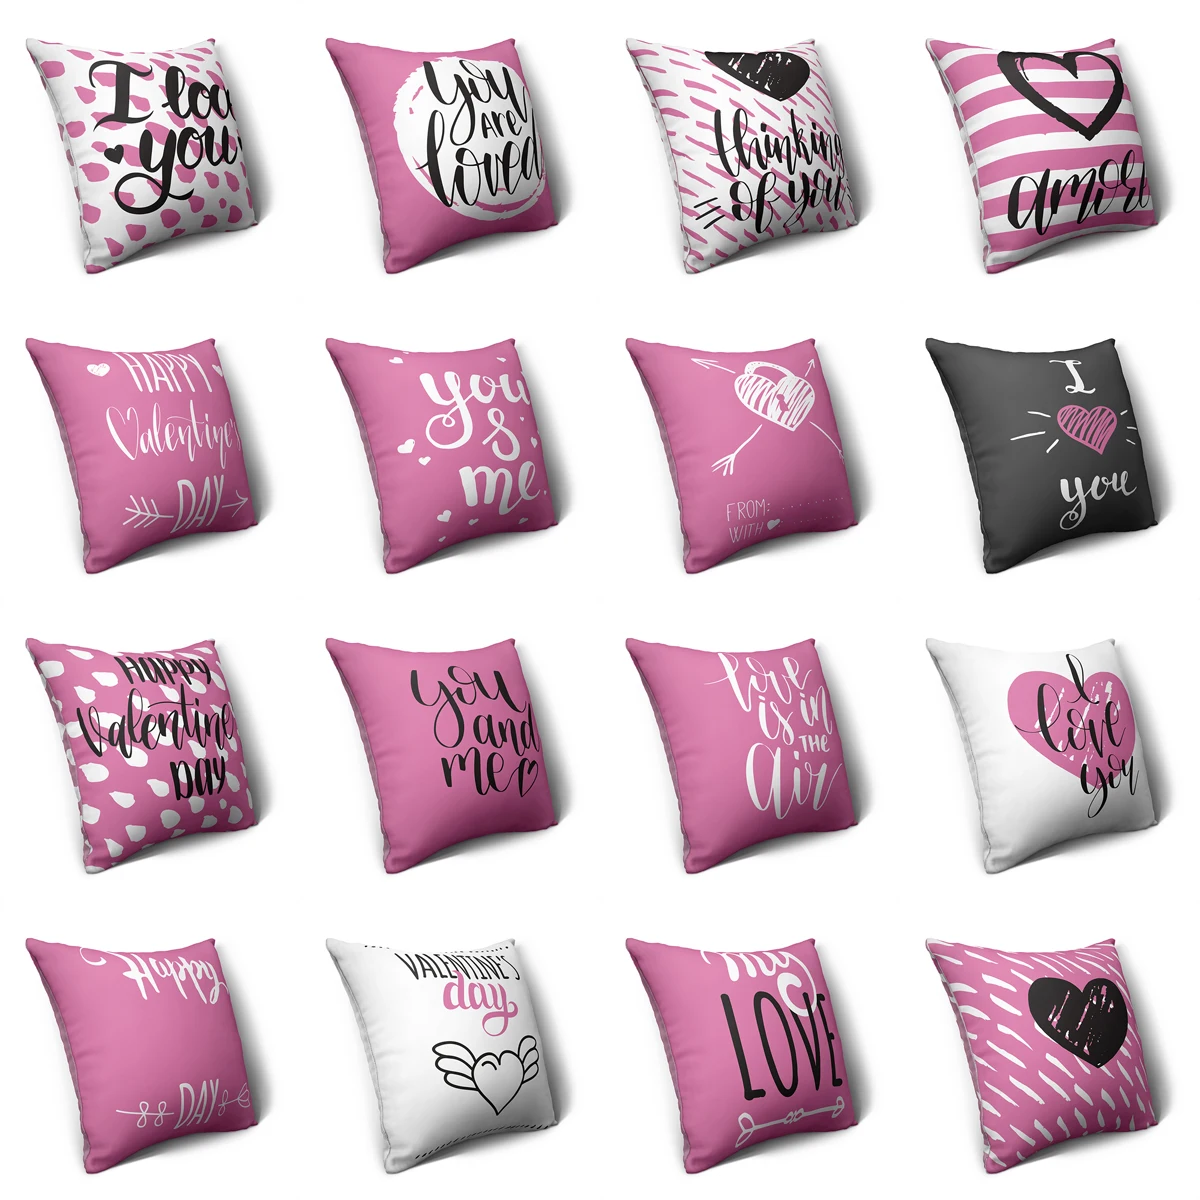 

ZHENHE Romantic Valentine's Day Pillow Case Double Sided Printing Cushion Cover for Bedroom Sofa Decor 18x18 Inch （45x45cm）